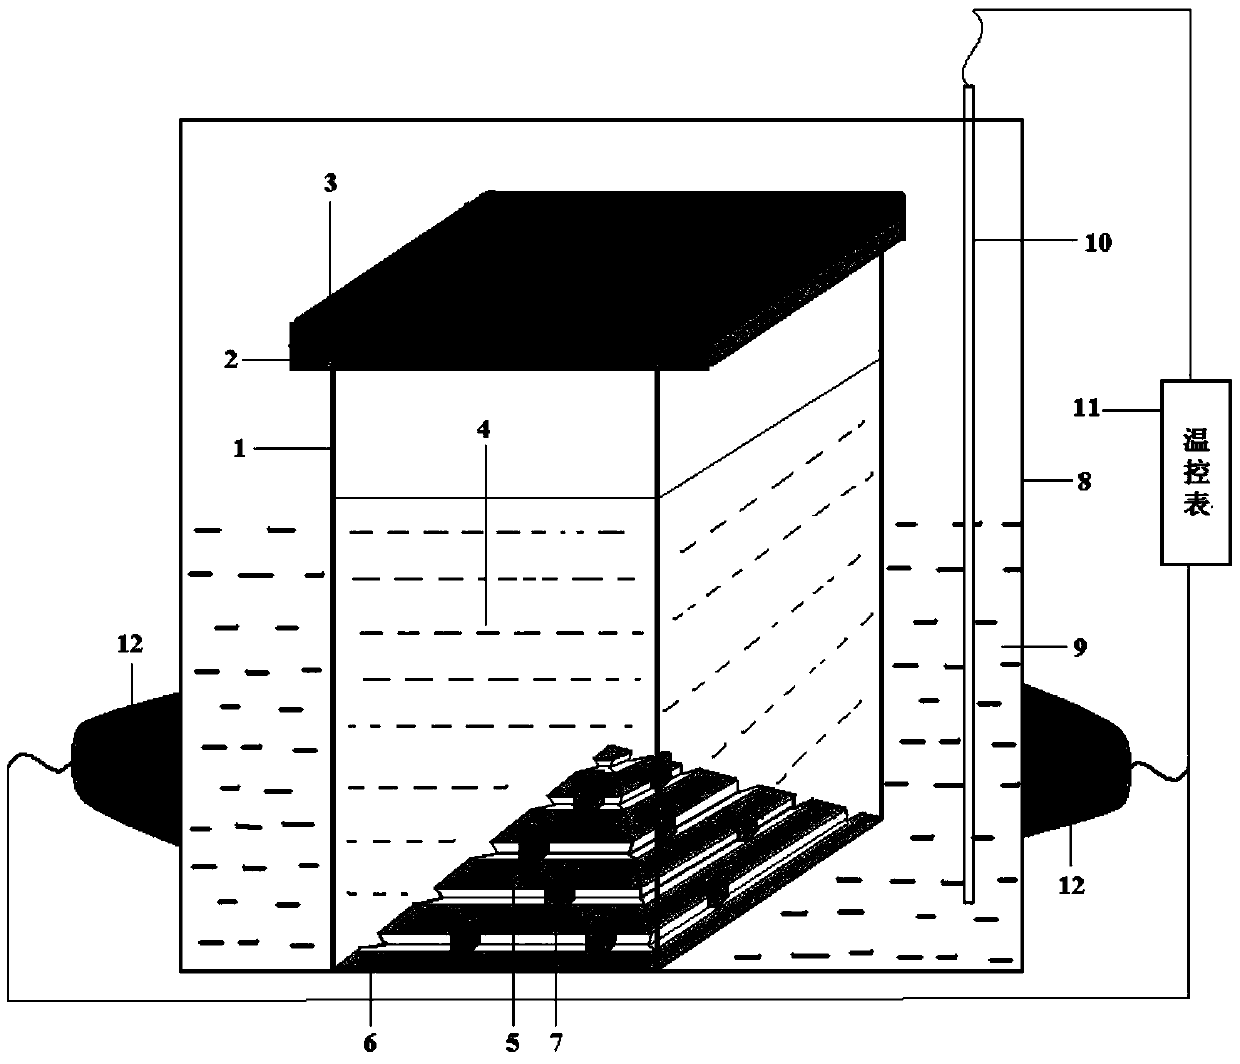 A device for spontaneous nucleation and growth of dast crystals at the bottom of a square pyramid